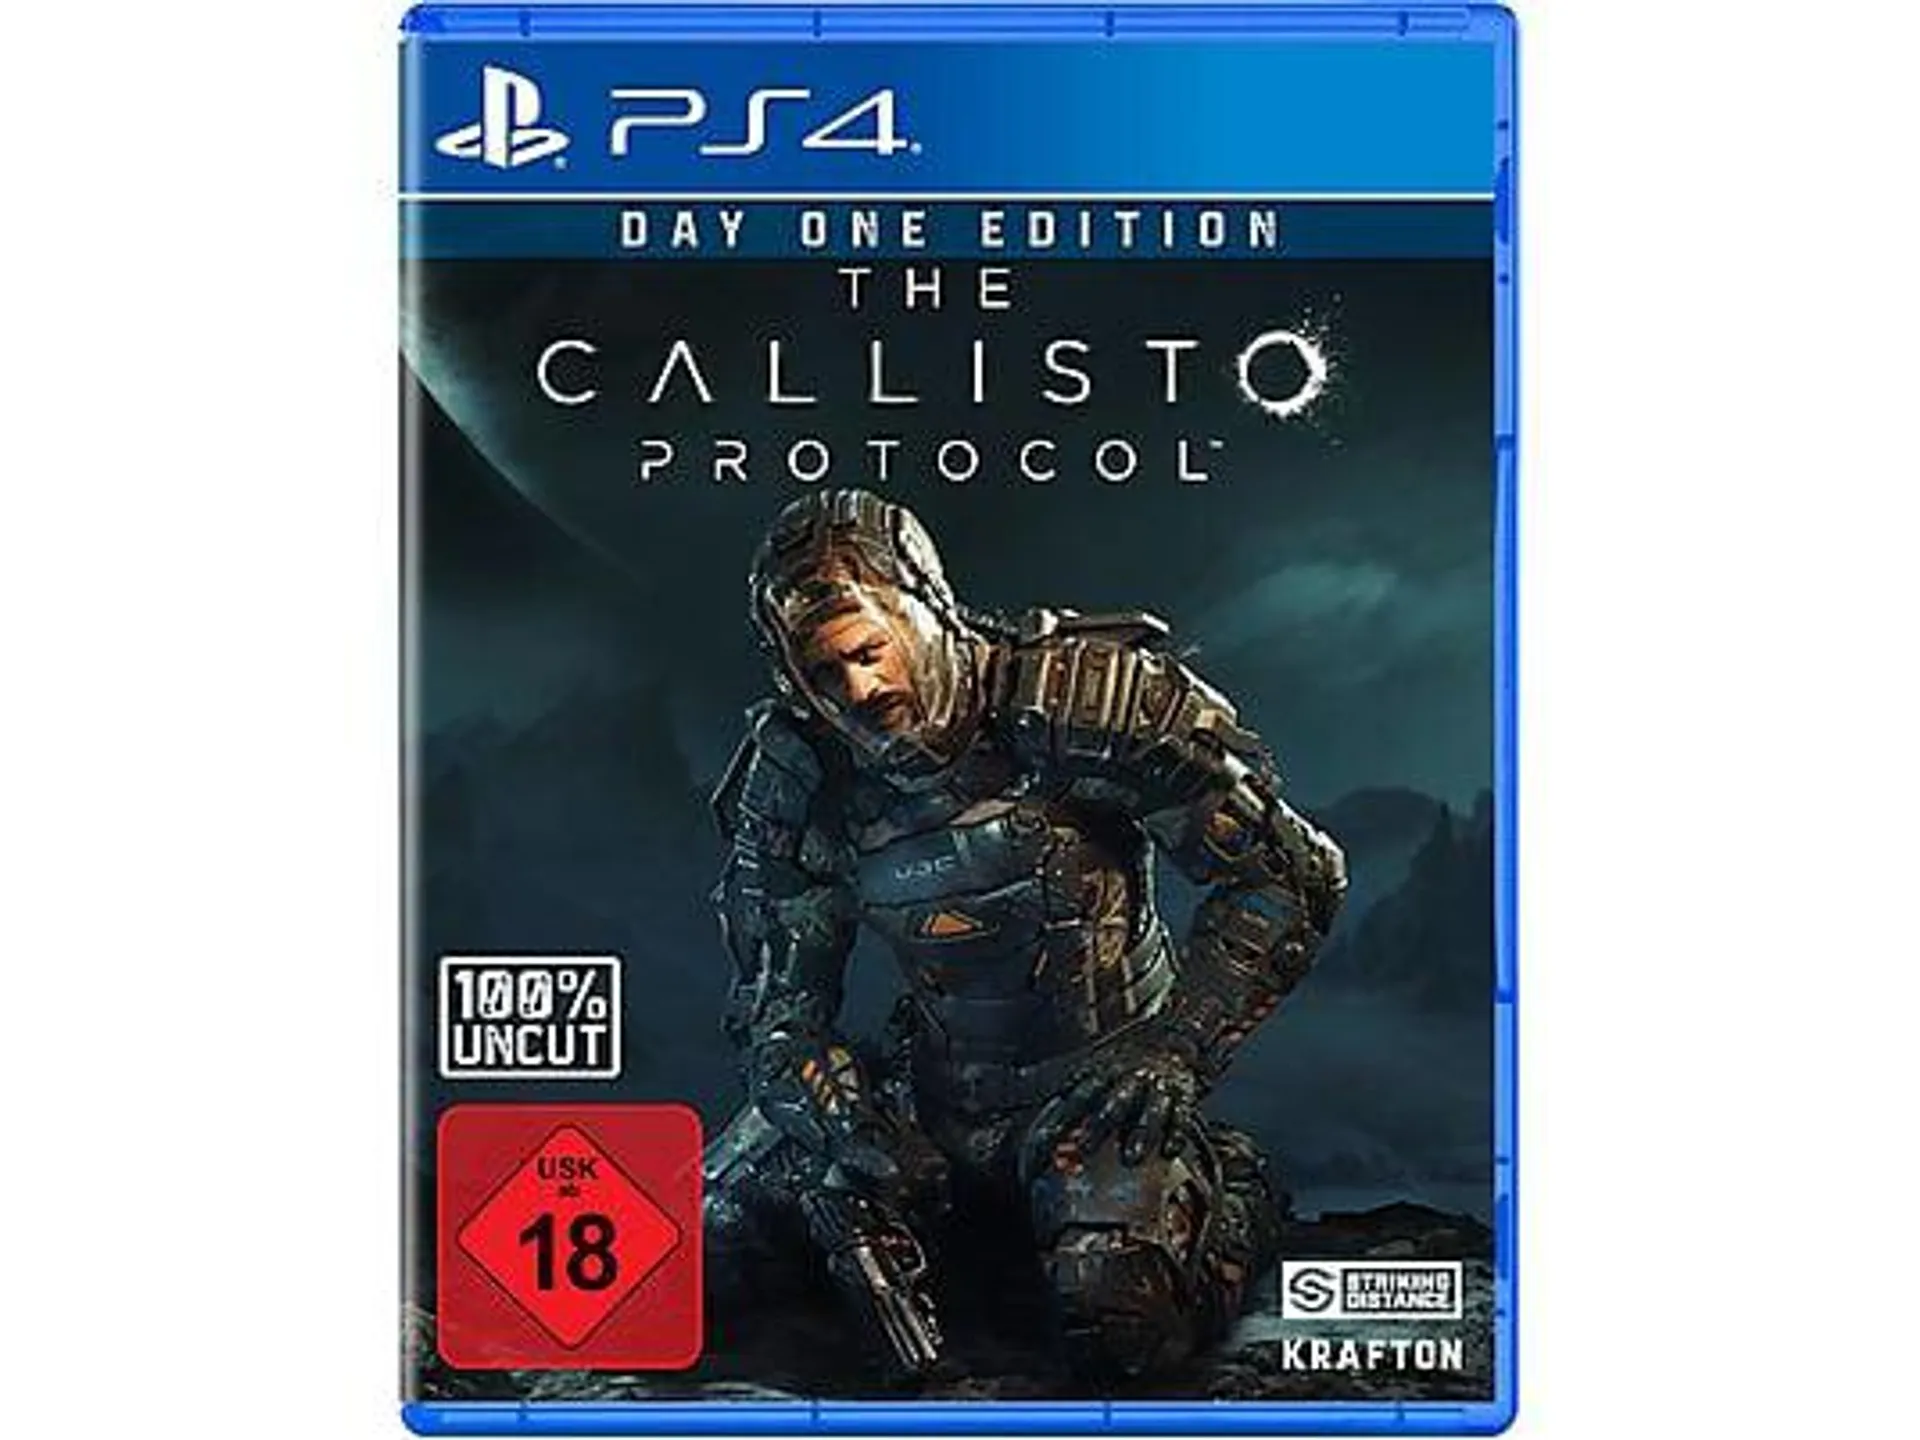 The Callisto Protocol - Day One Edition - [PlayStation 4]